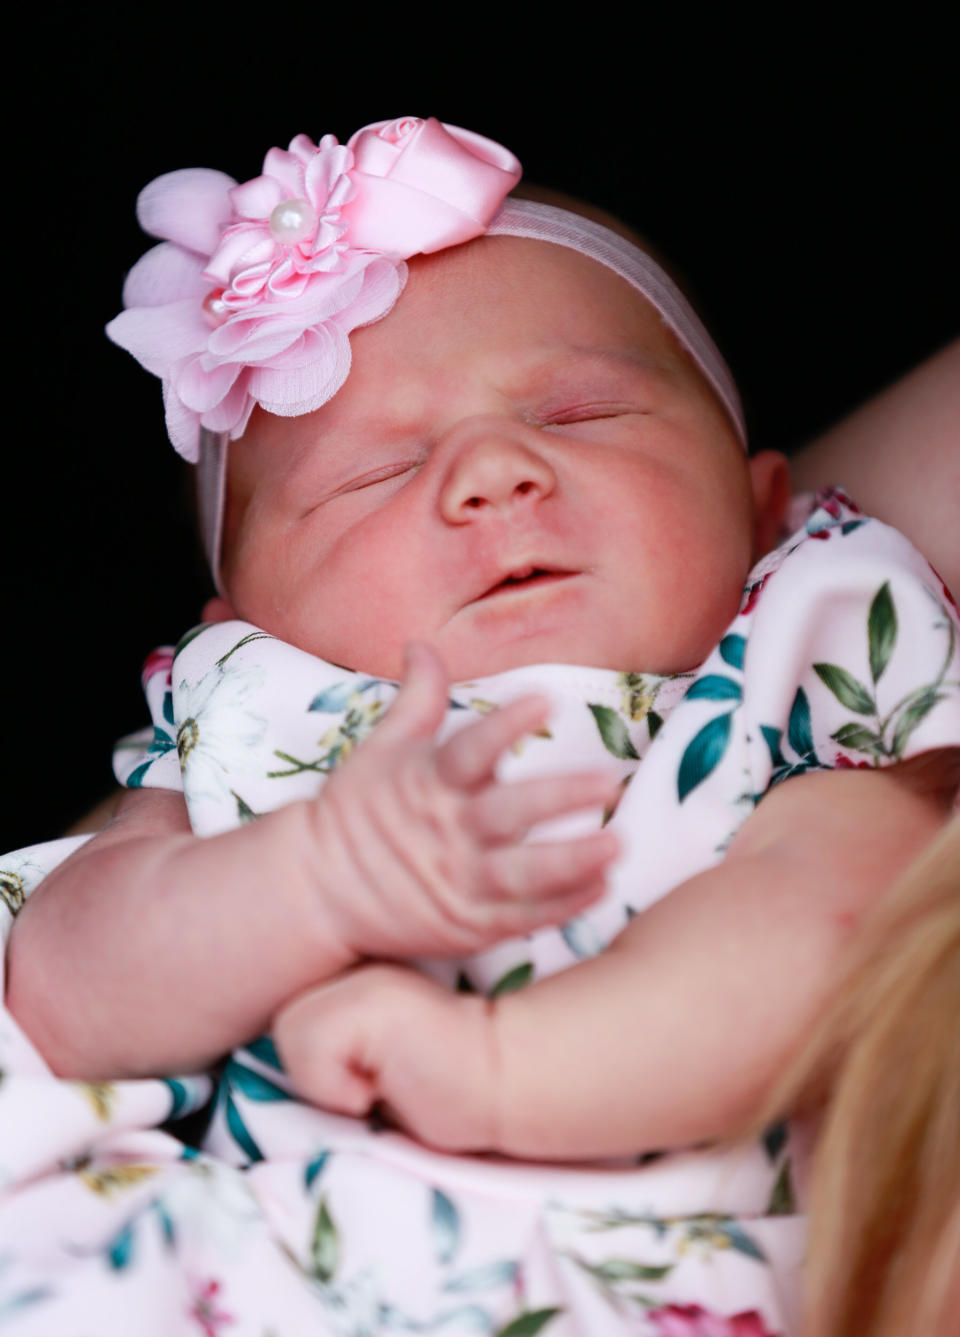 Baby Katilyn made a surprising entrance into the world [Photo: Tom Maddick/SWNS]